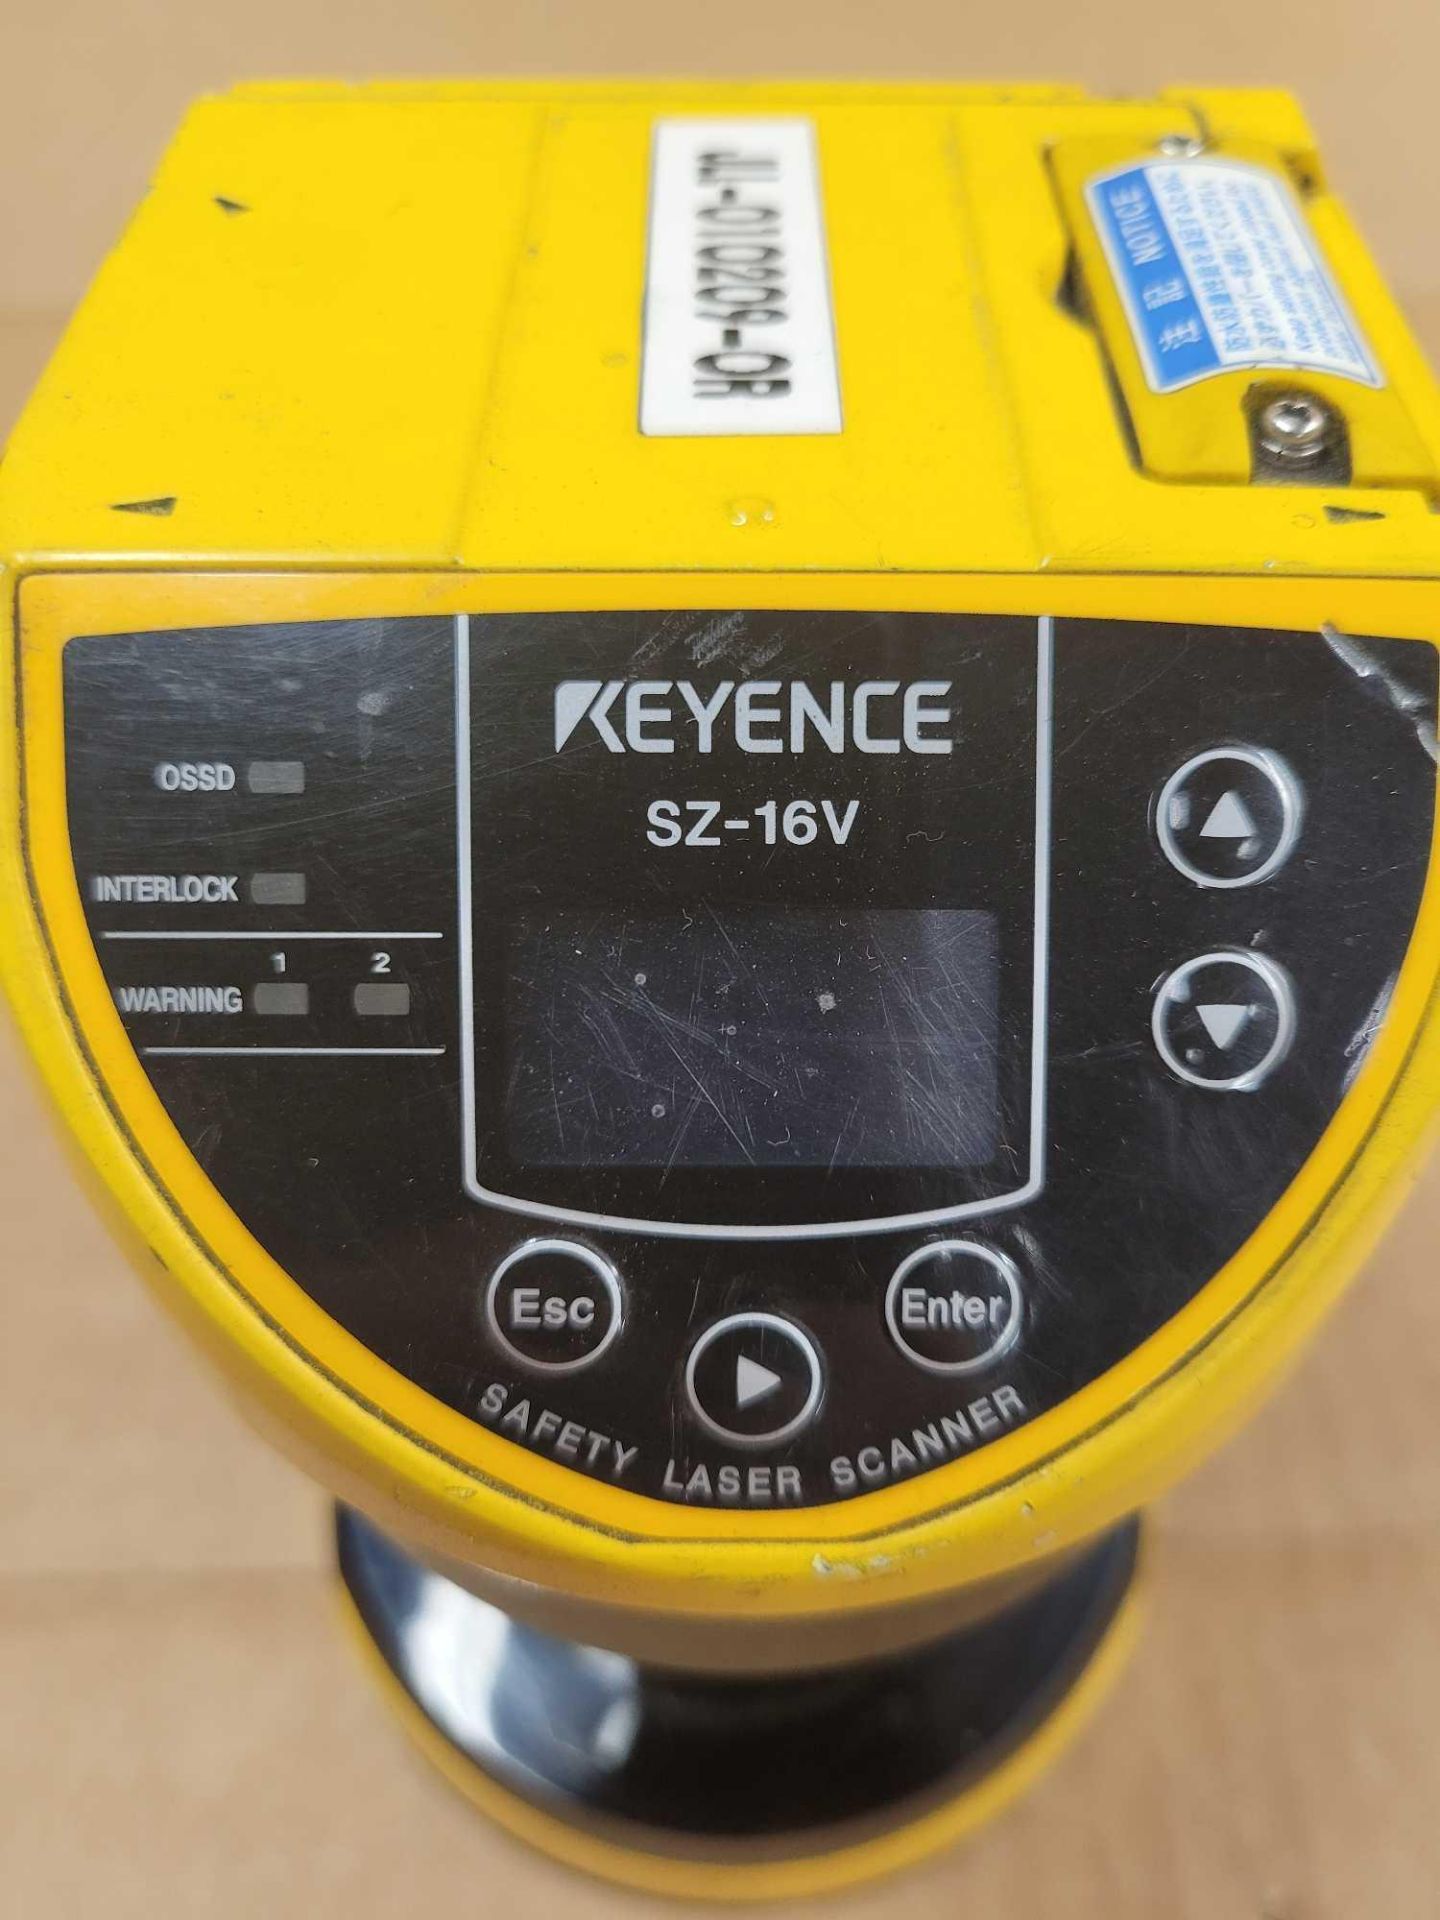 KEYENCE SZ-16V / Safety Laser Scanner  /  Lot Weight: 4.2 lbs - Image 6 of 7